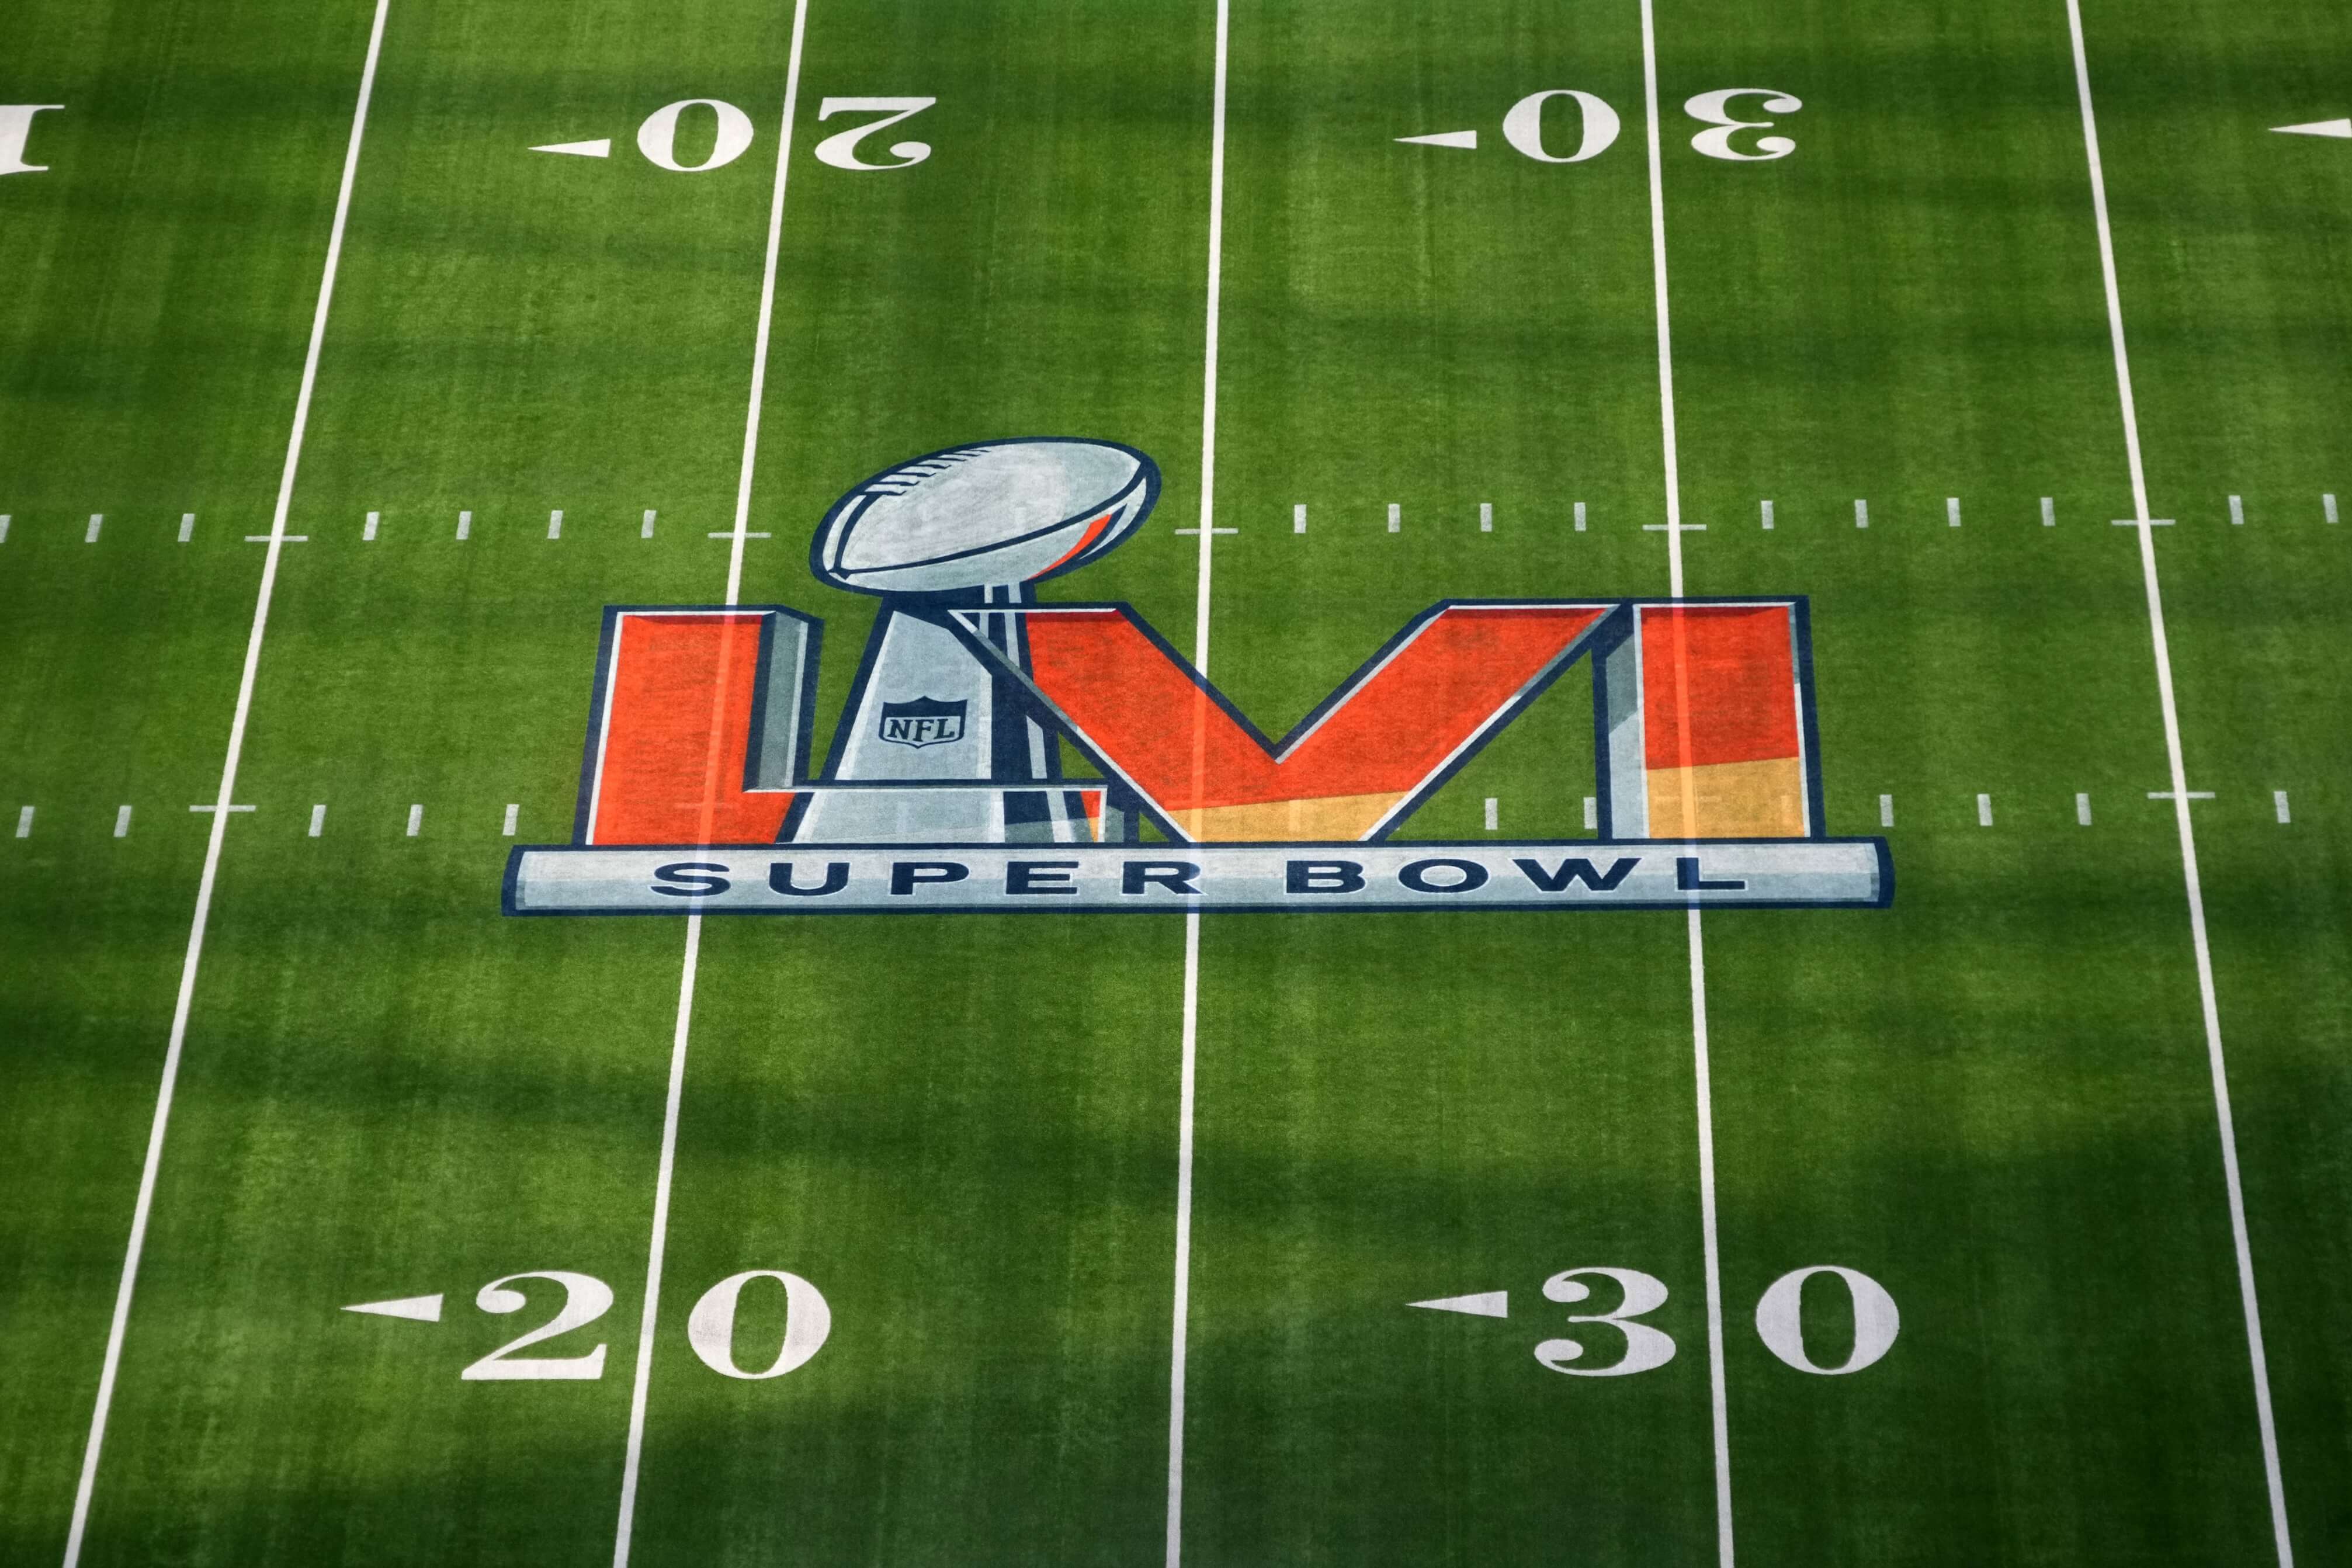 Feb 1, 2022; Inglewood, CA, USA; A detailed view of the Super Bowl LVI logo on the field at SoFi Stadium. Super Bowl 56 between the Los Angeles Rams and the Cincinnati Bengals will be played on Feb. 13, 2022.